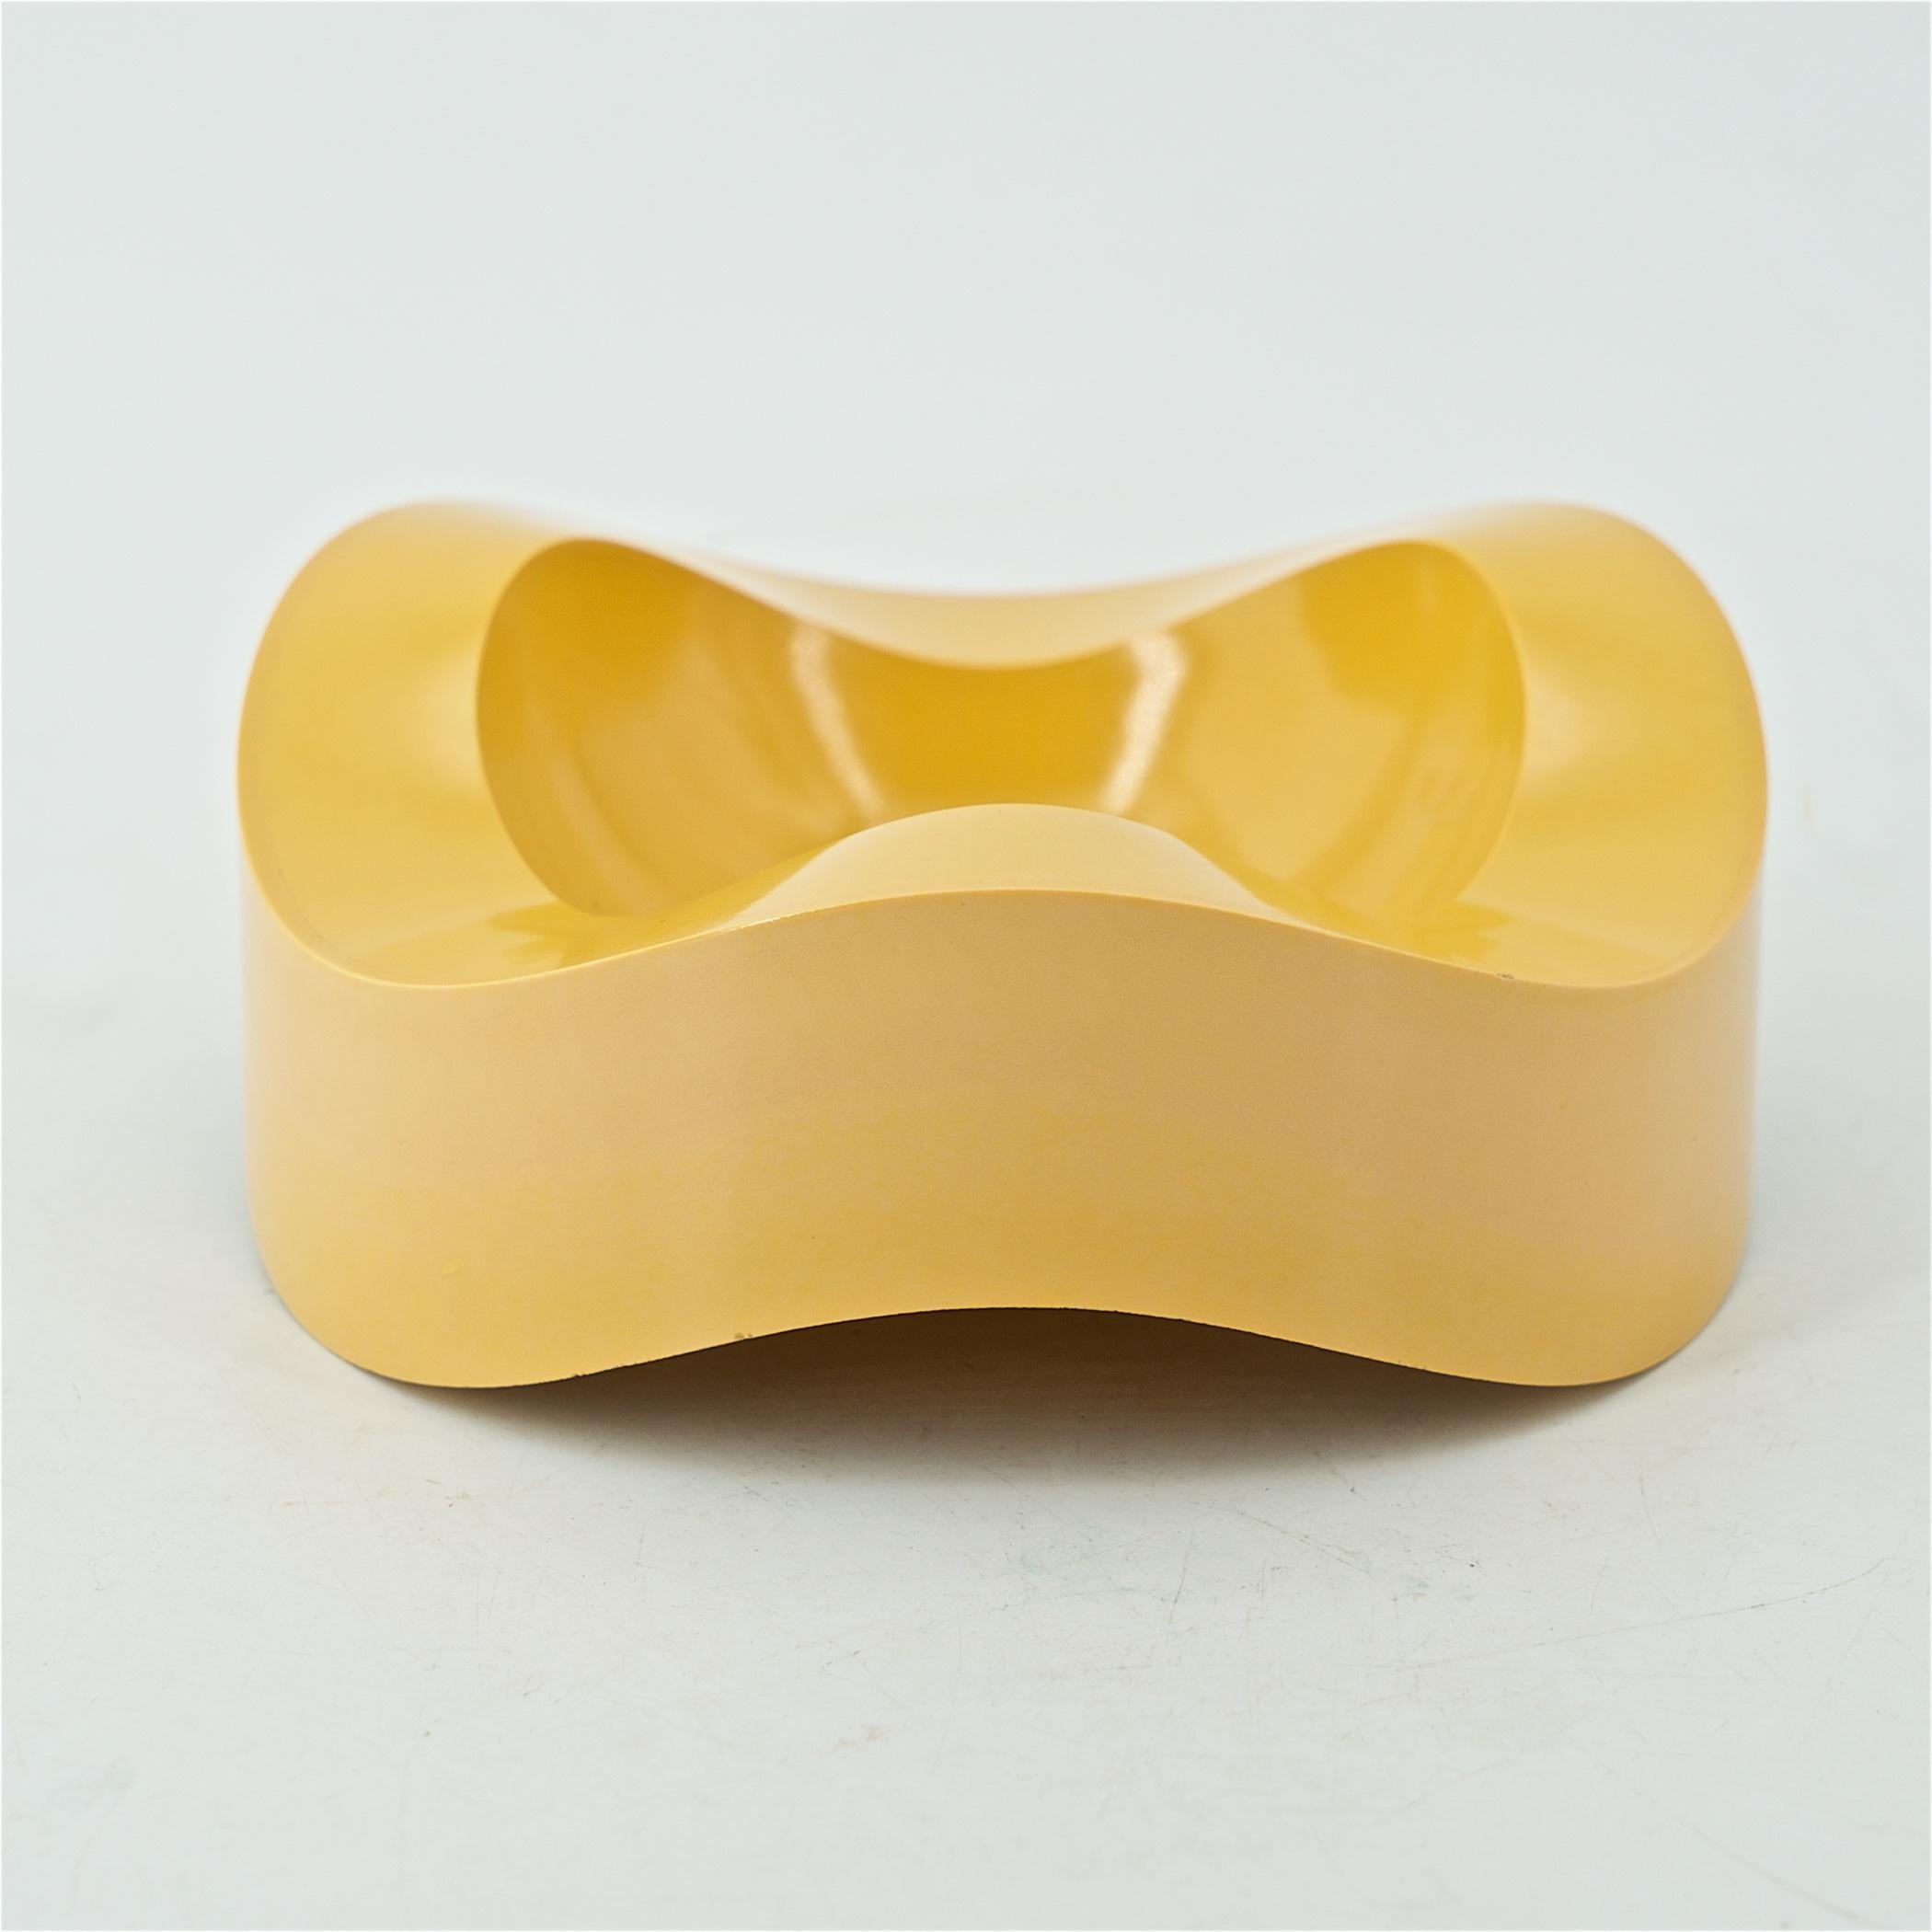 Germany, 1967. A yellow rotomolded abs plastic three wave ashtray, but never used as an ashtray.